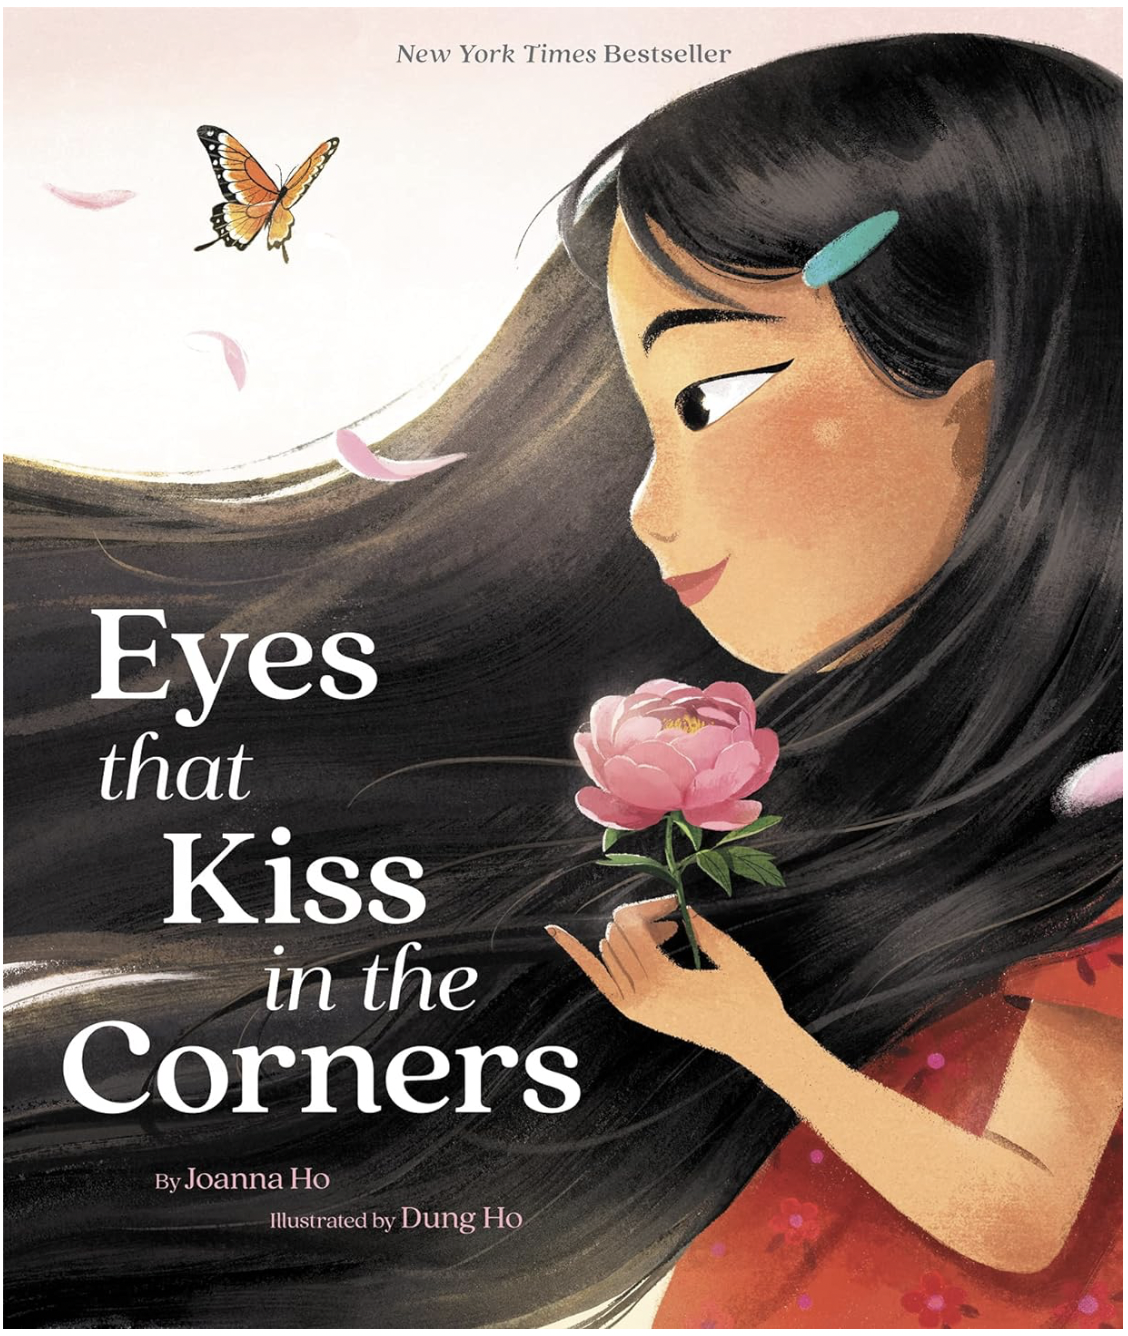 Eyes that kiss at the corners